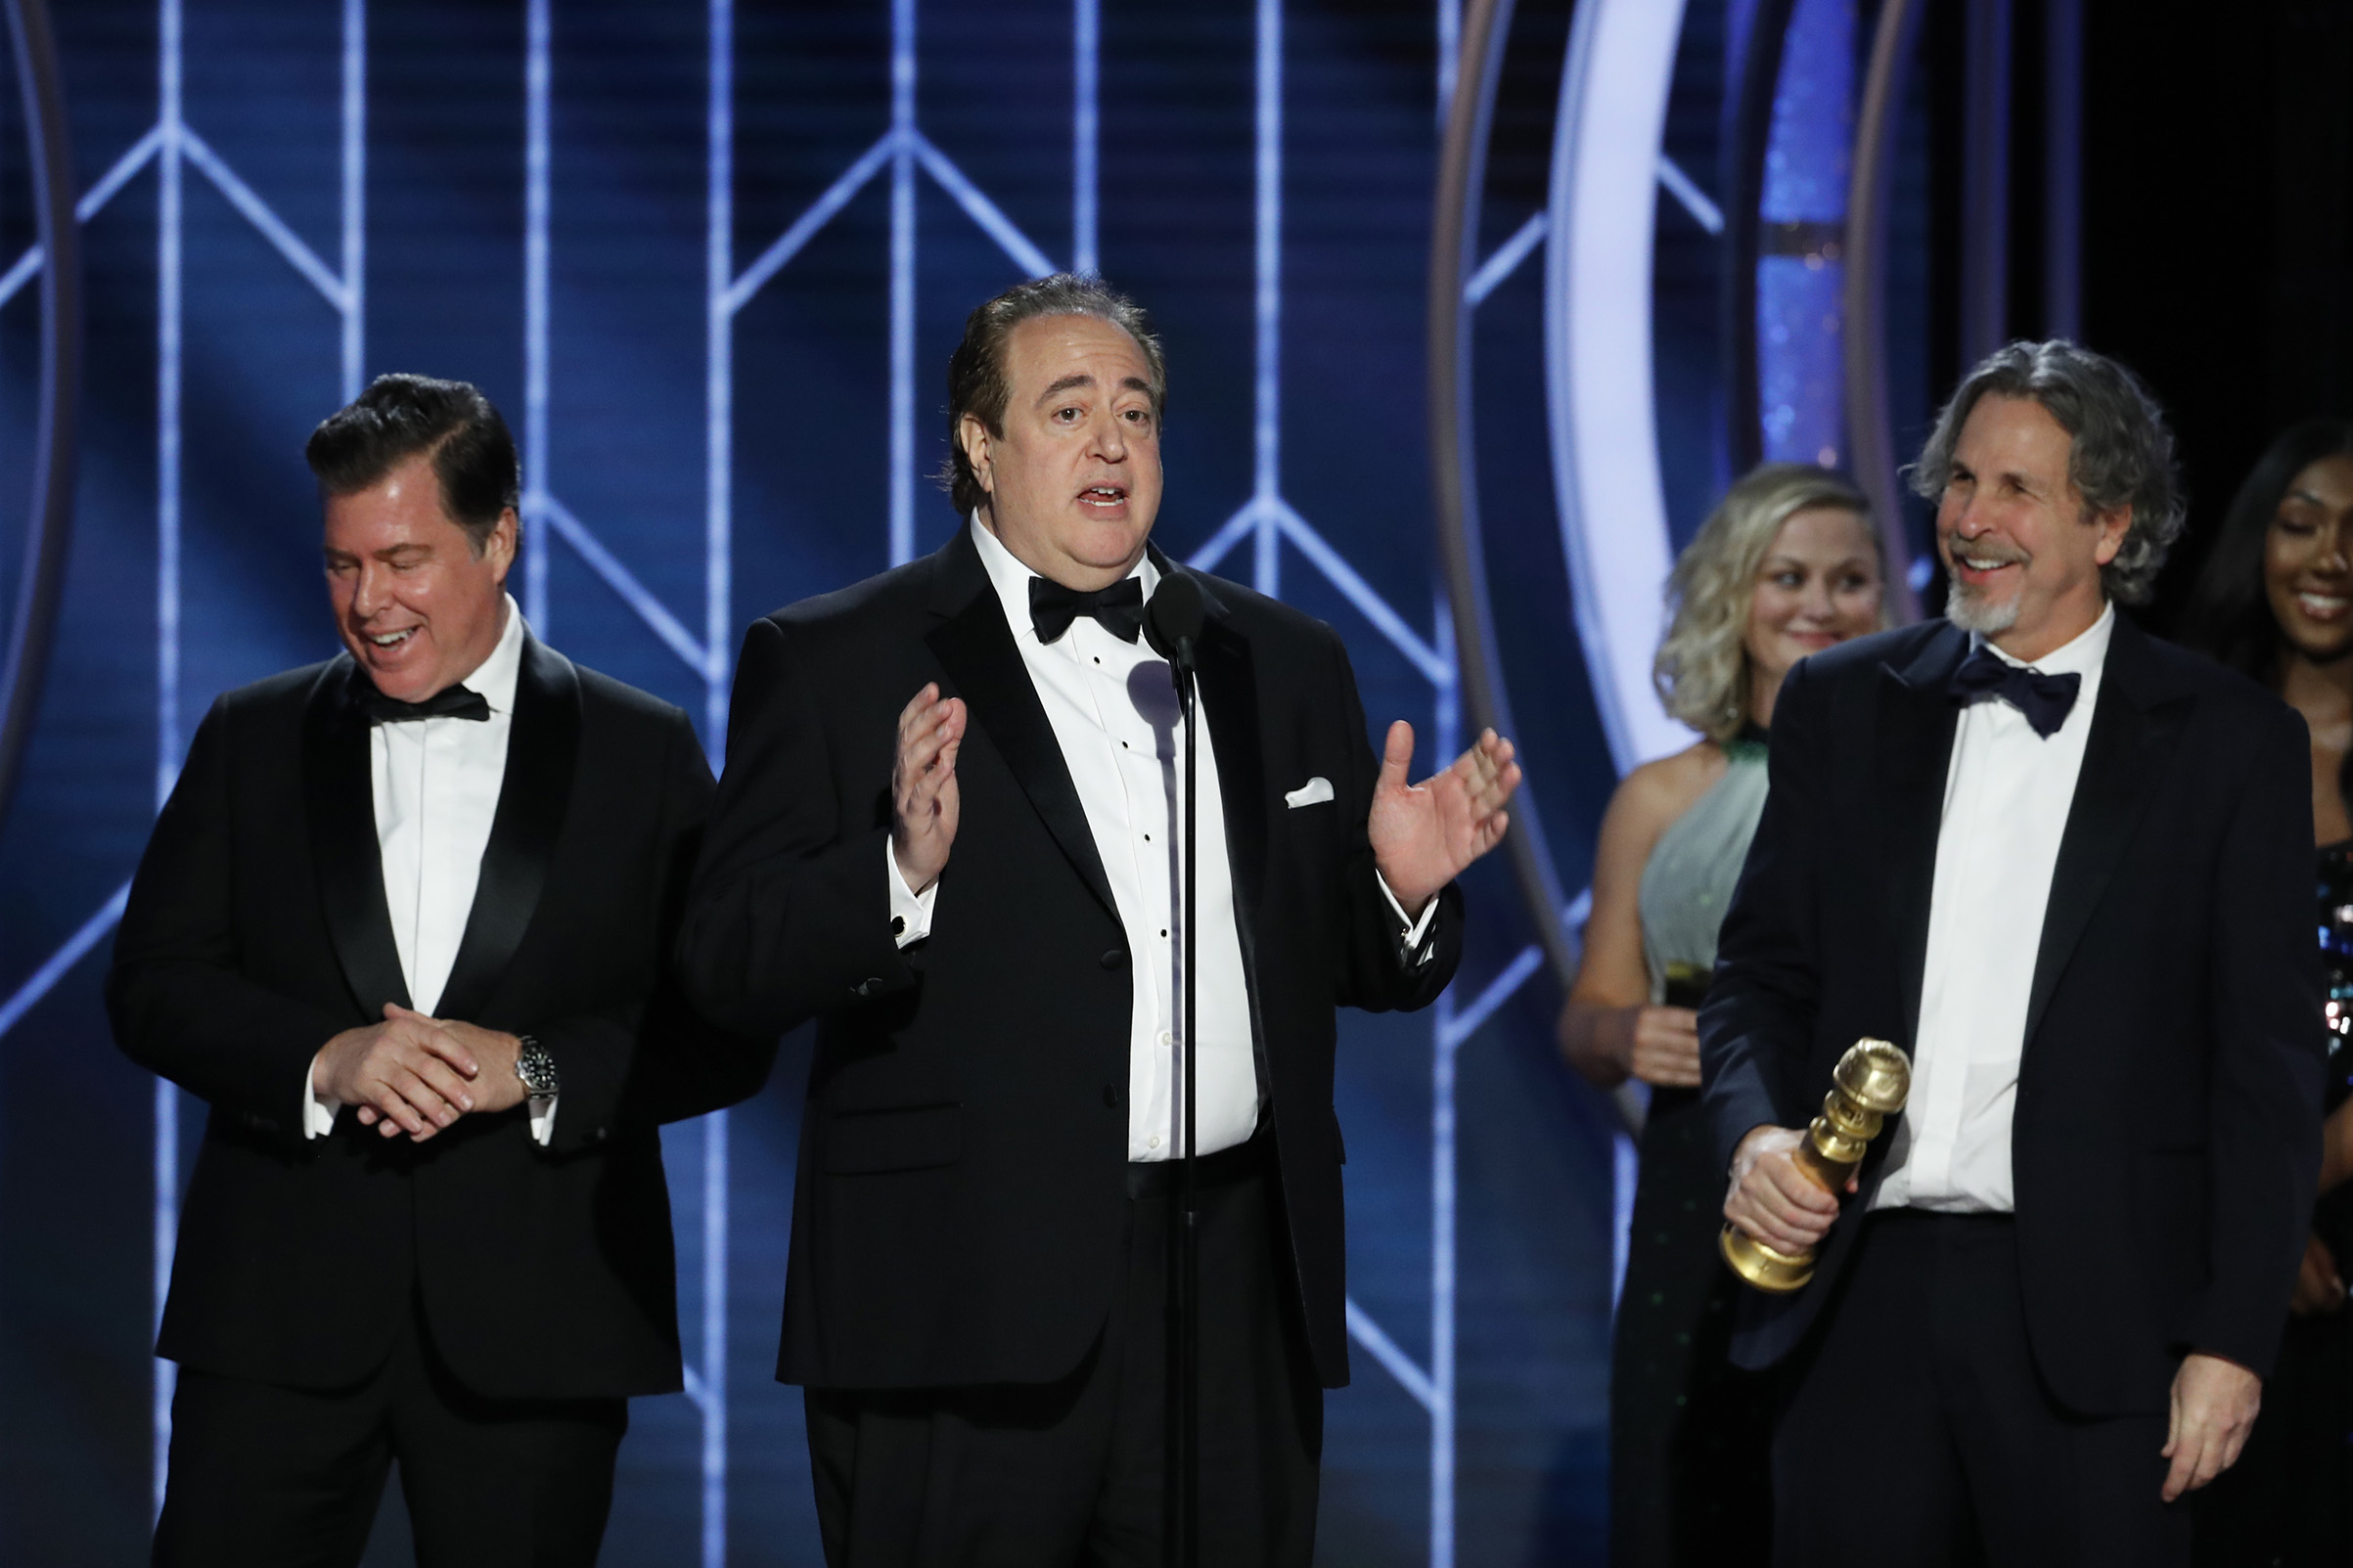 Brian Currie, Nick Vallelonga and Peter Farrelly of “Green Book” accept the Best Screenplay – Motion Picture award onstage during the 76th Annual Golden Globe Awards. (NBCUniversal/Getty Images)